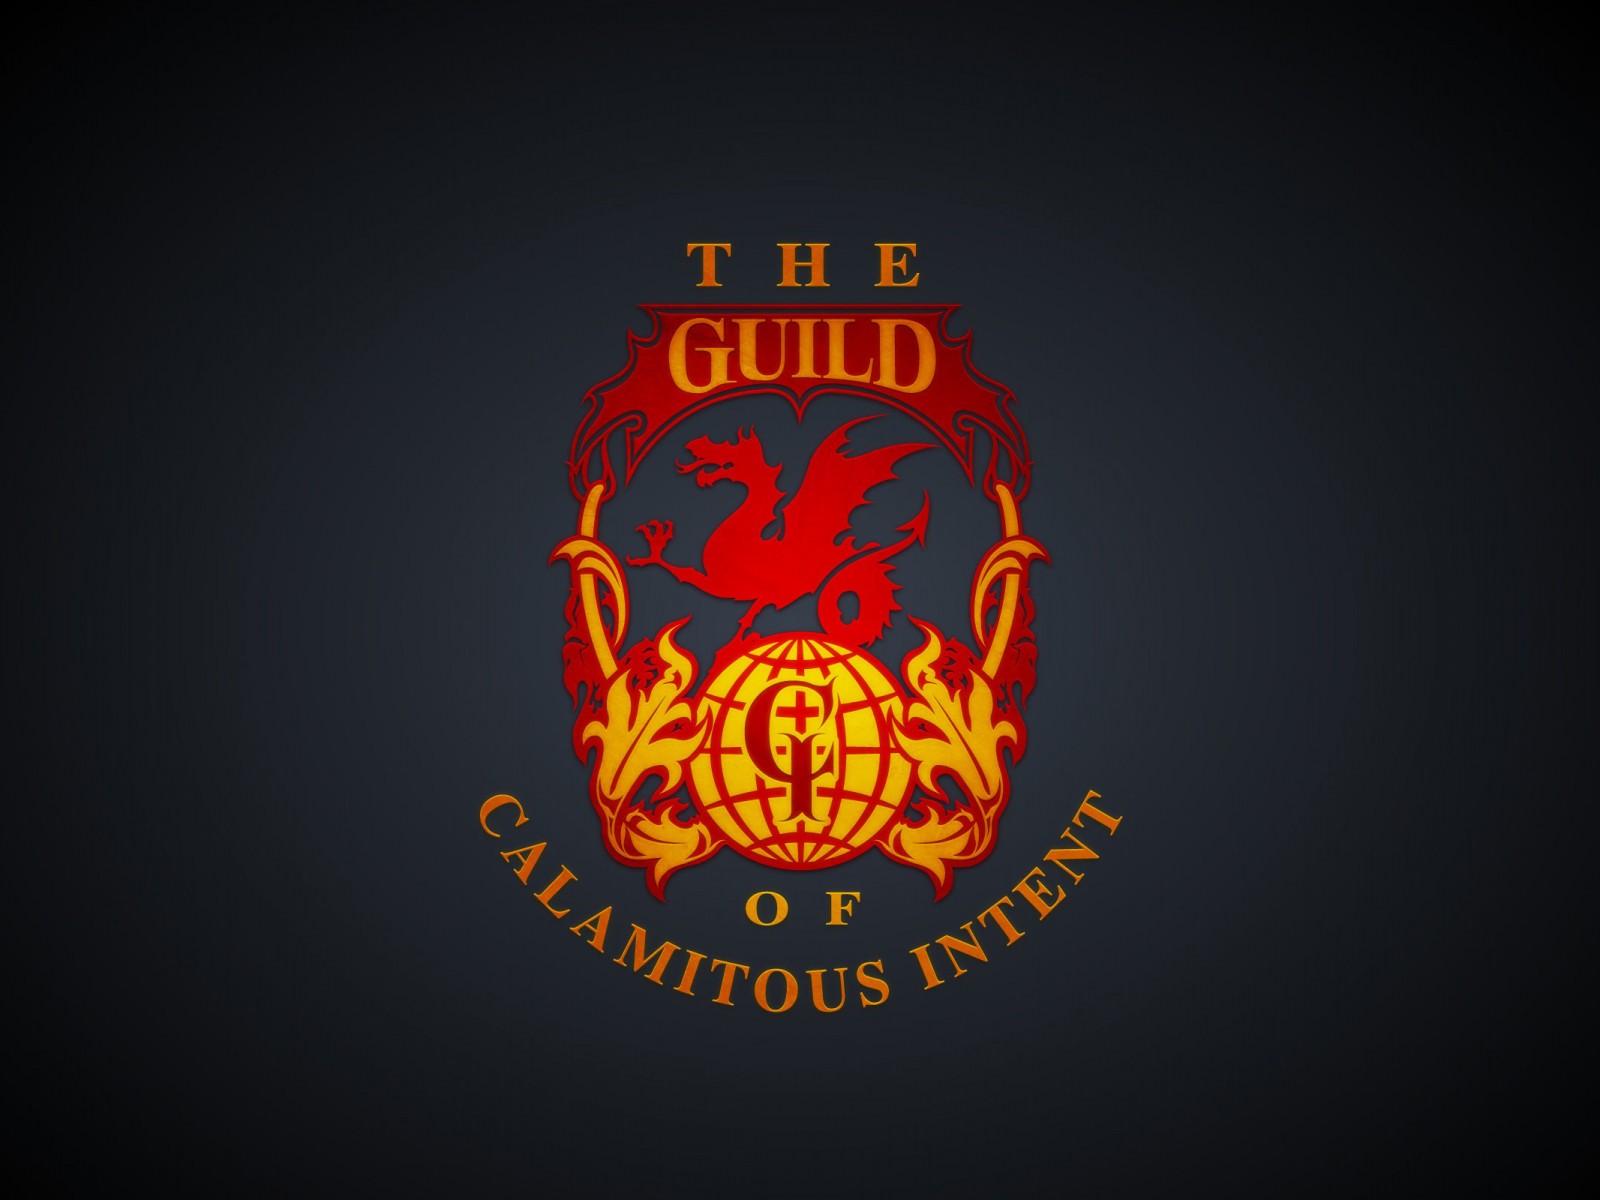 The Guild of Calamitous Intent